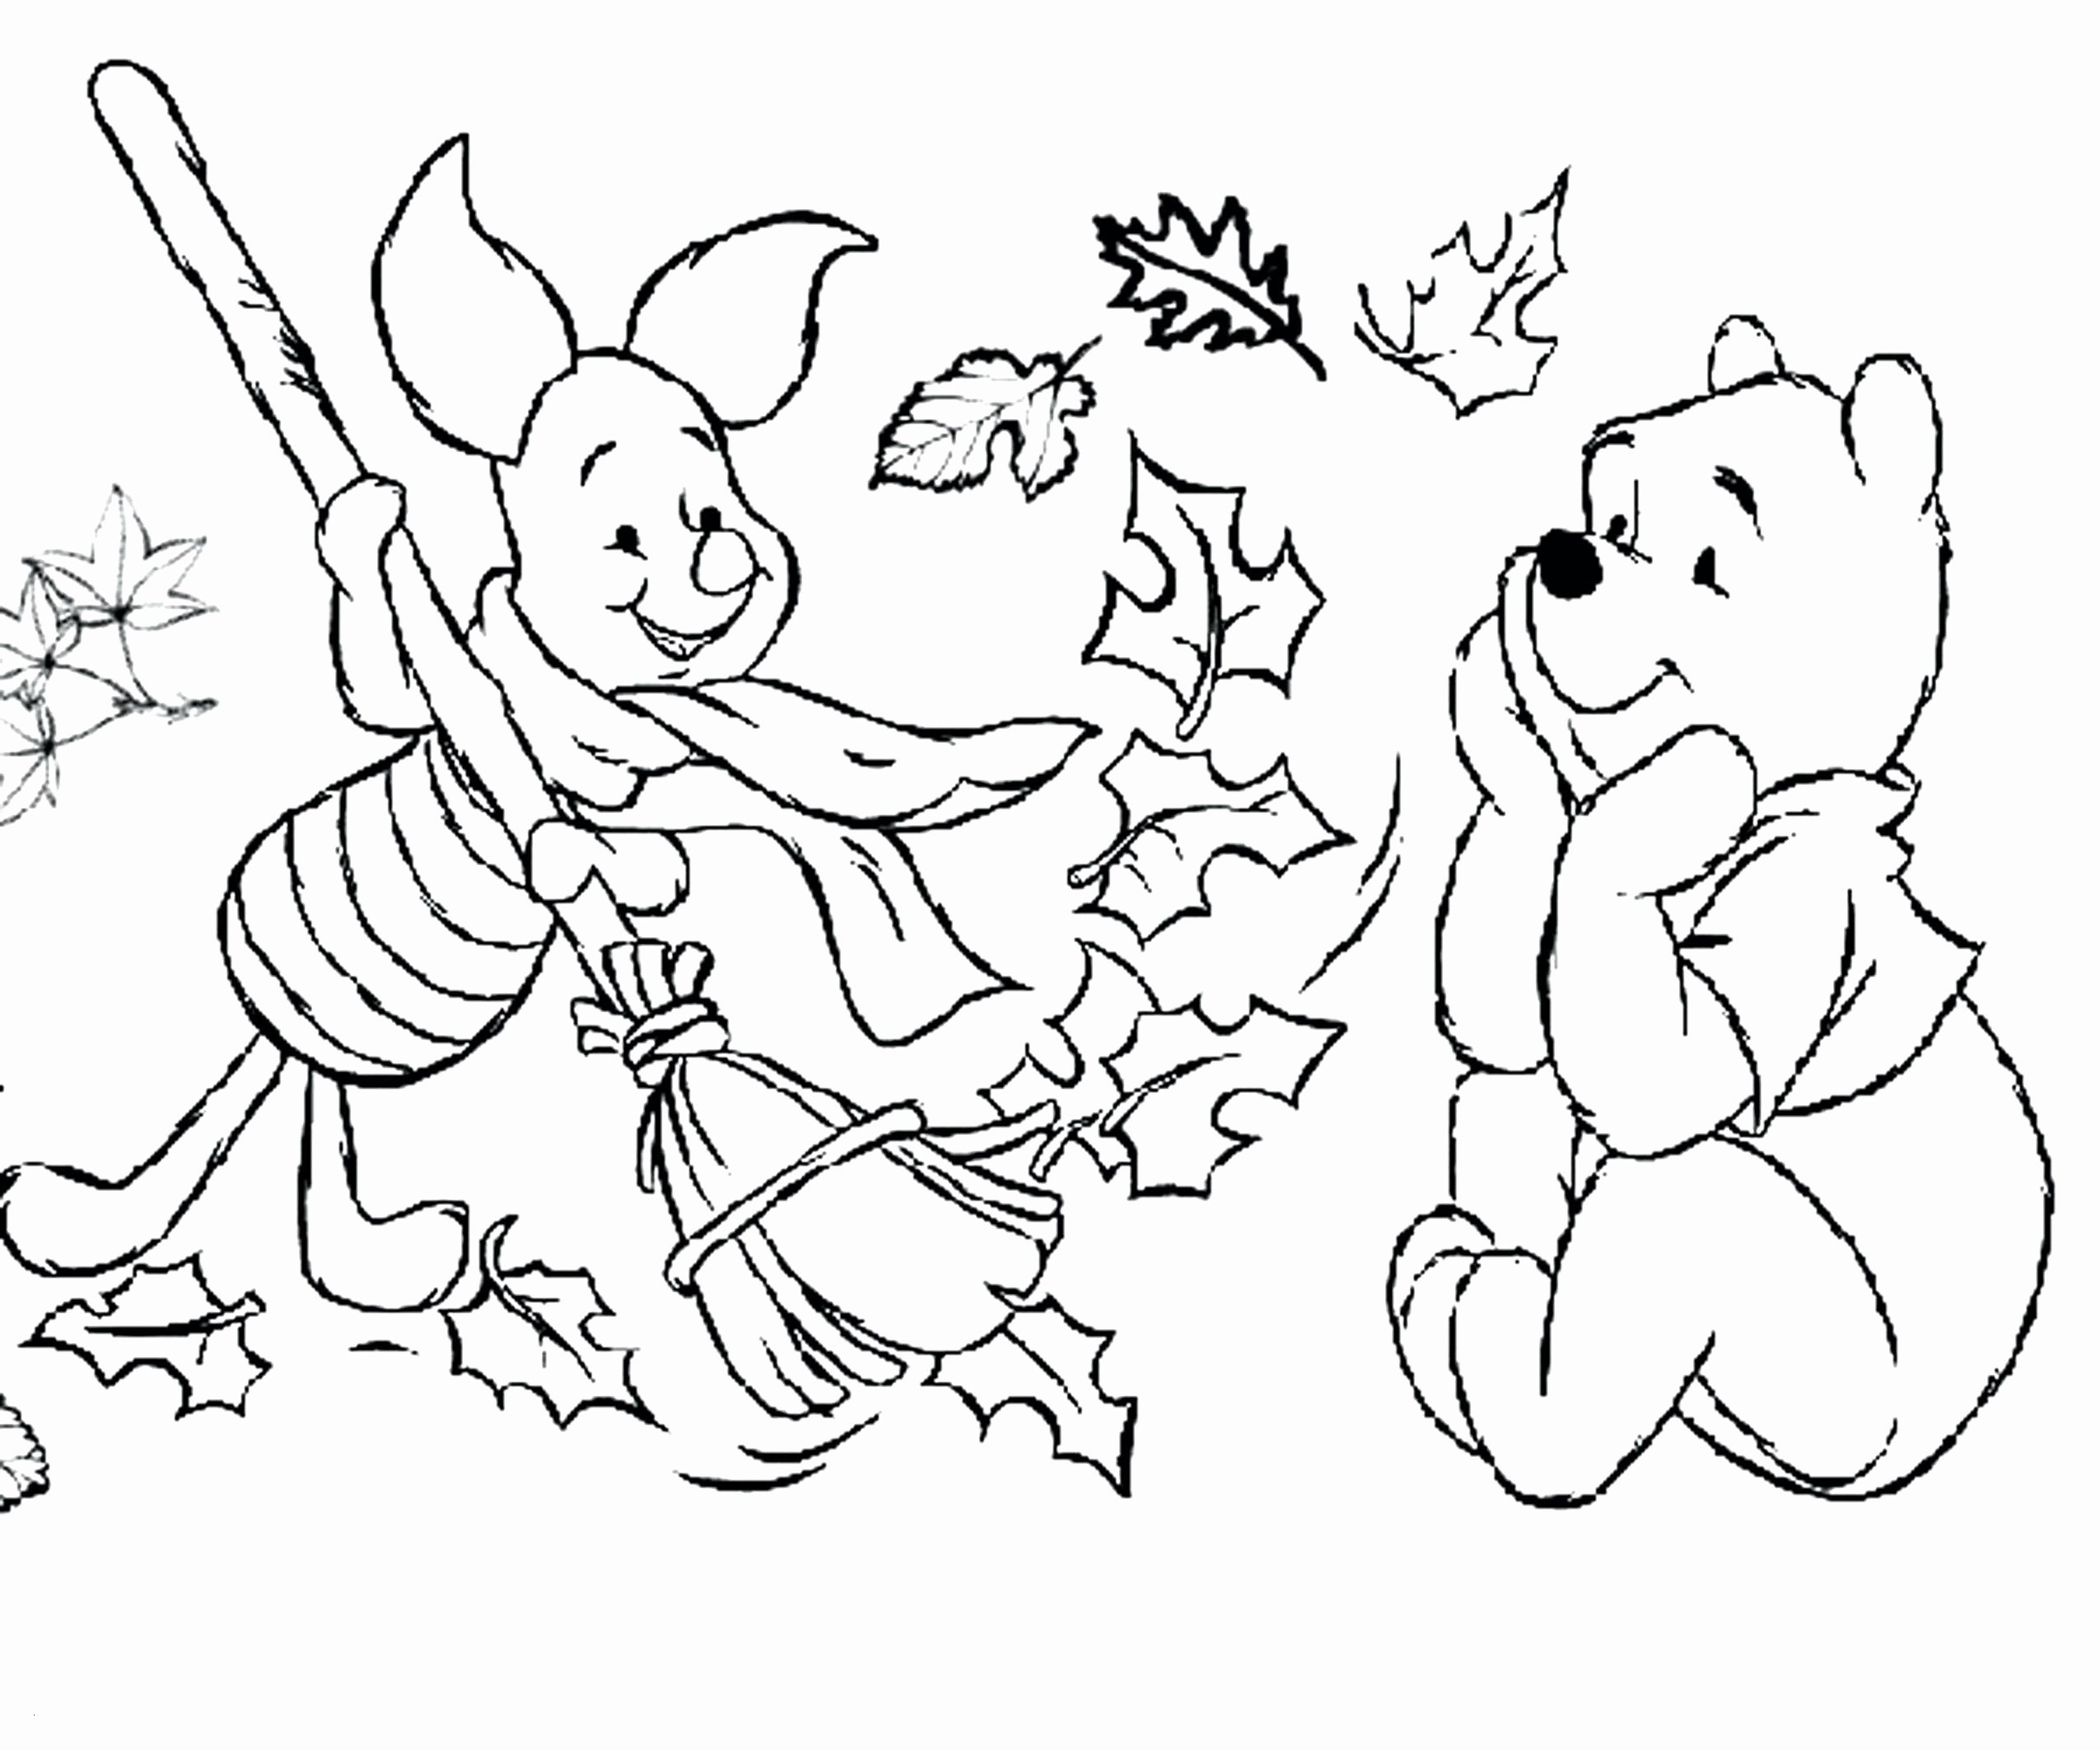 Free Farm Animals Coloring Pages Fresh Farm Animal Coloring Pages for toddlers Inspirational Barn Animal